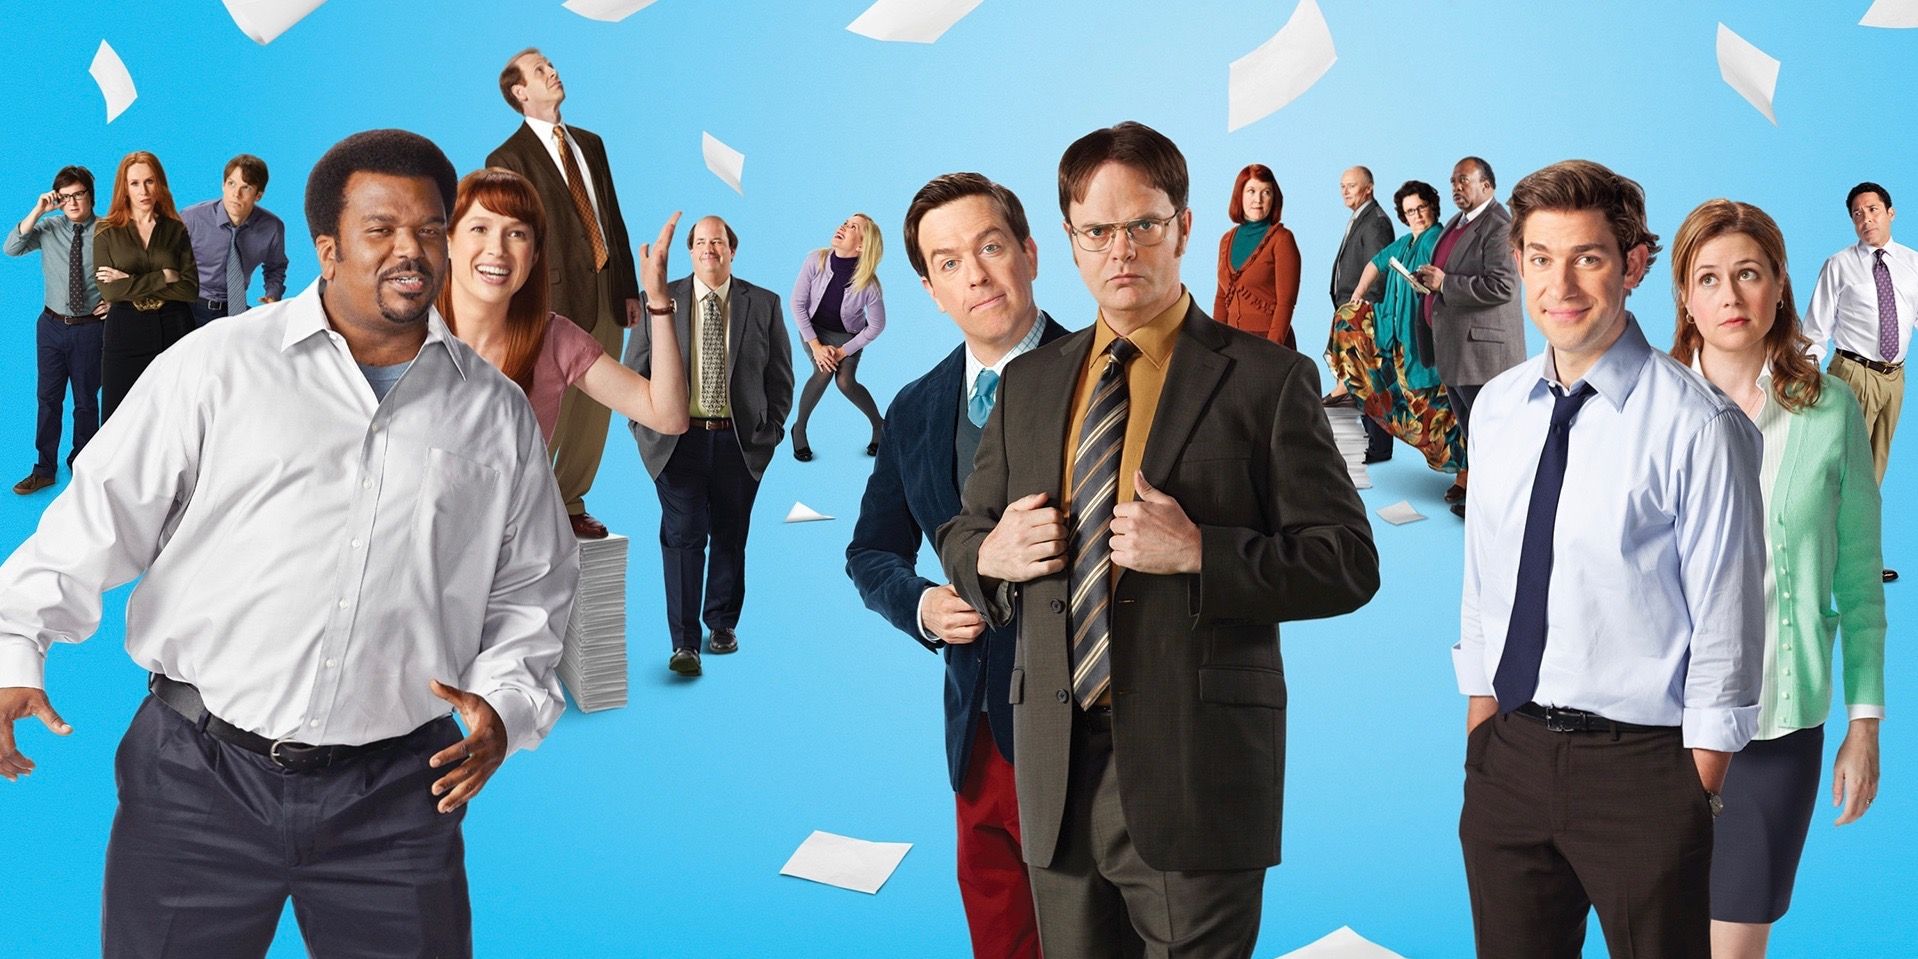 The Office: The 5 Best And Worst Episodes (According To IMDb)